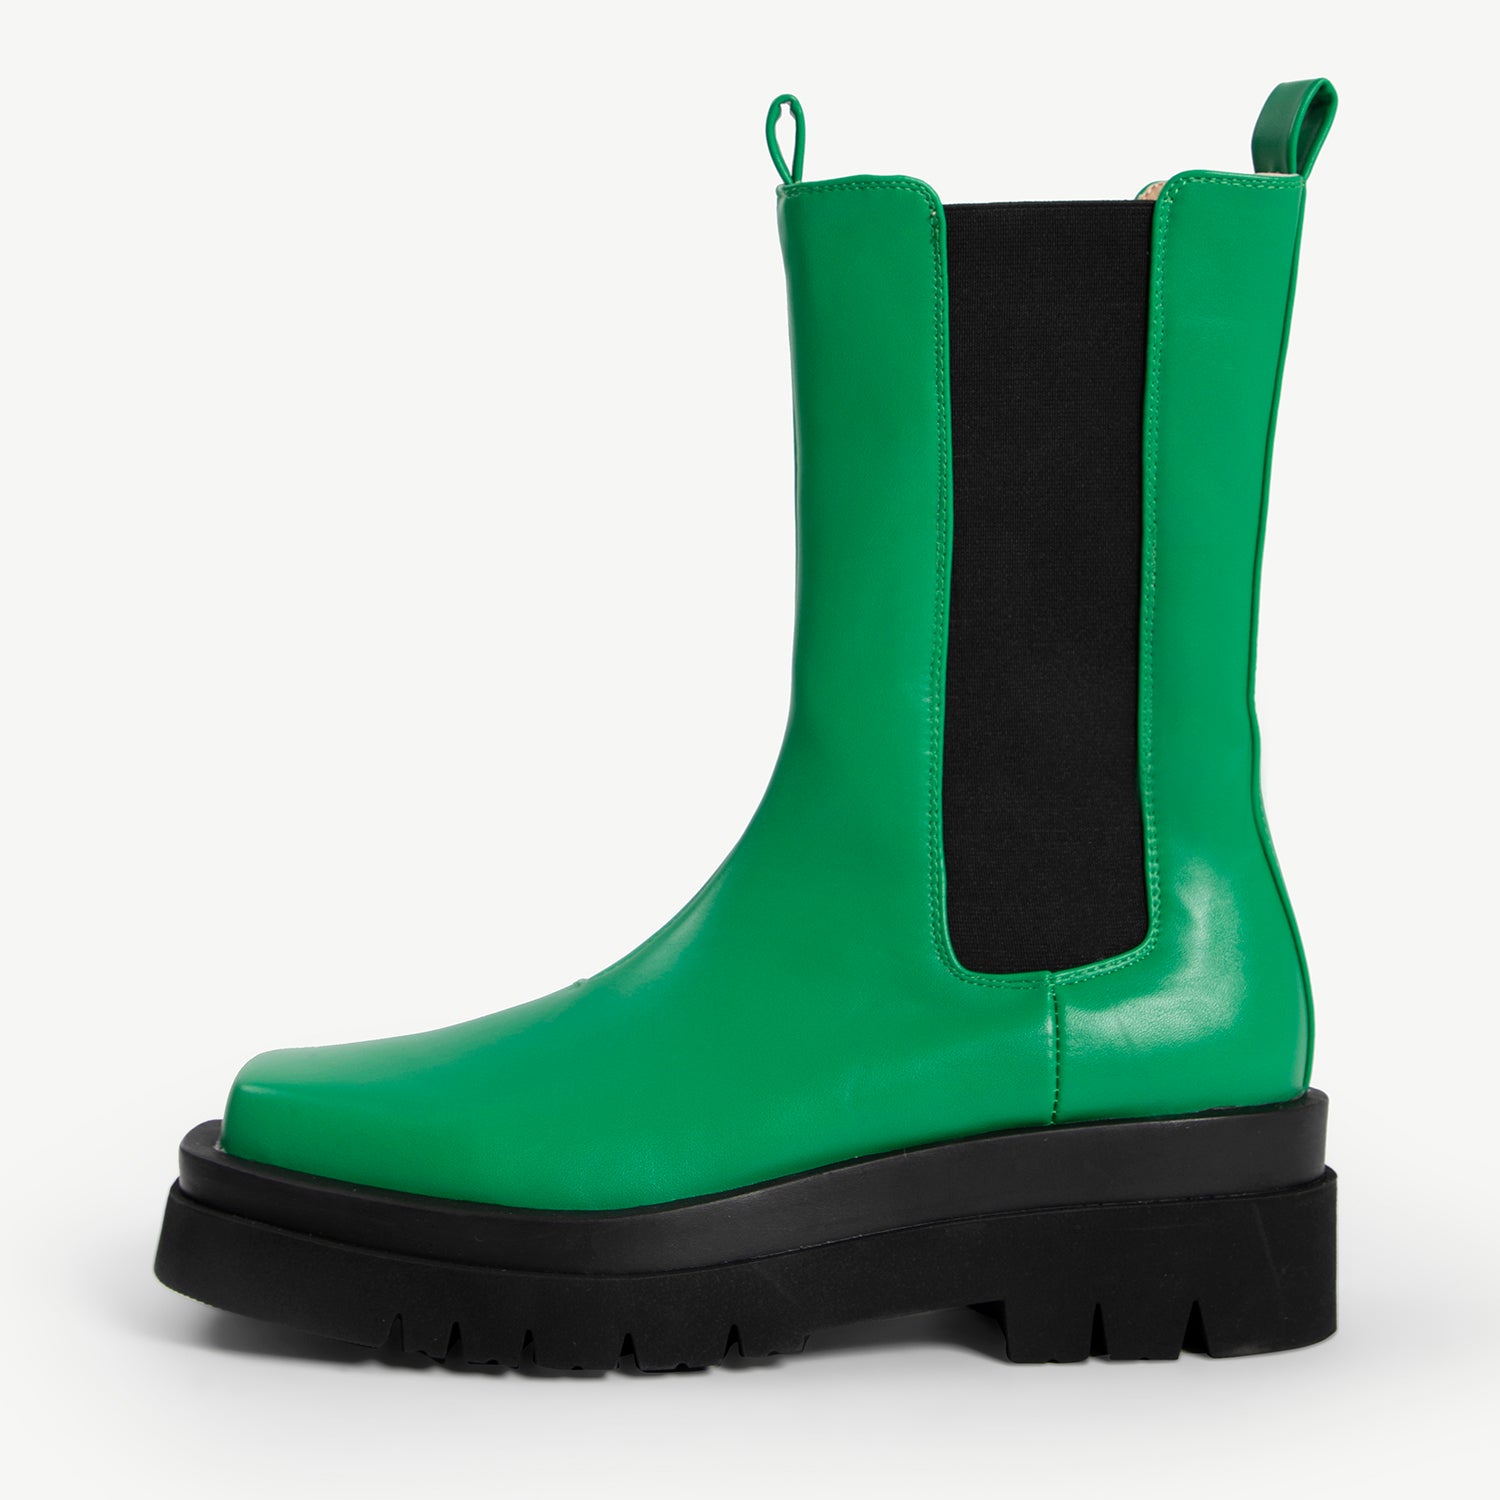 RAID Newport Ankle Boot in Green